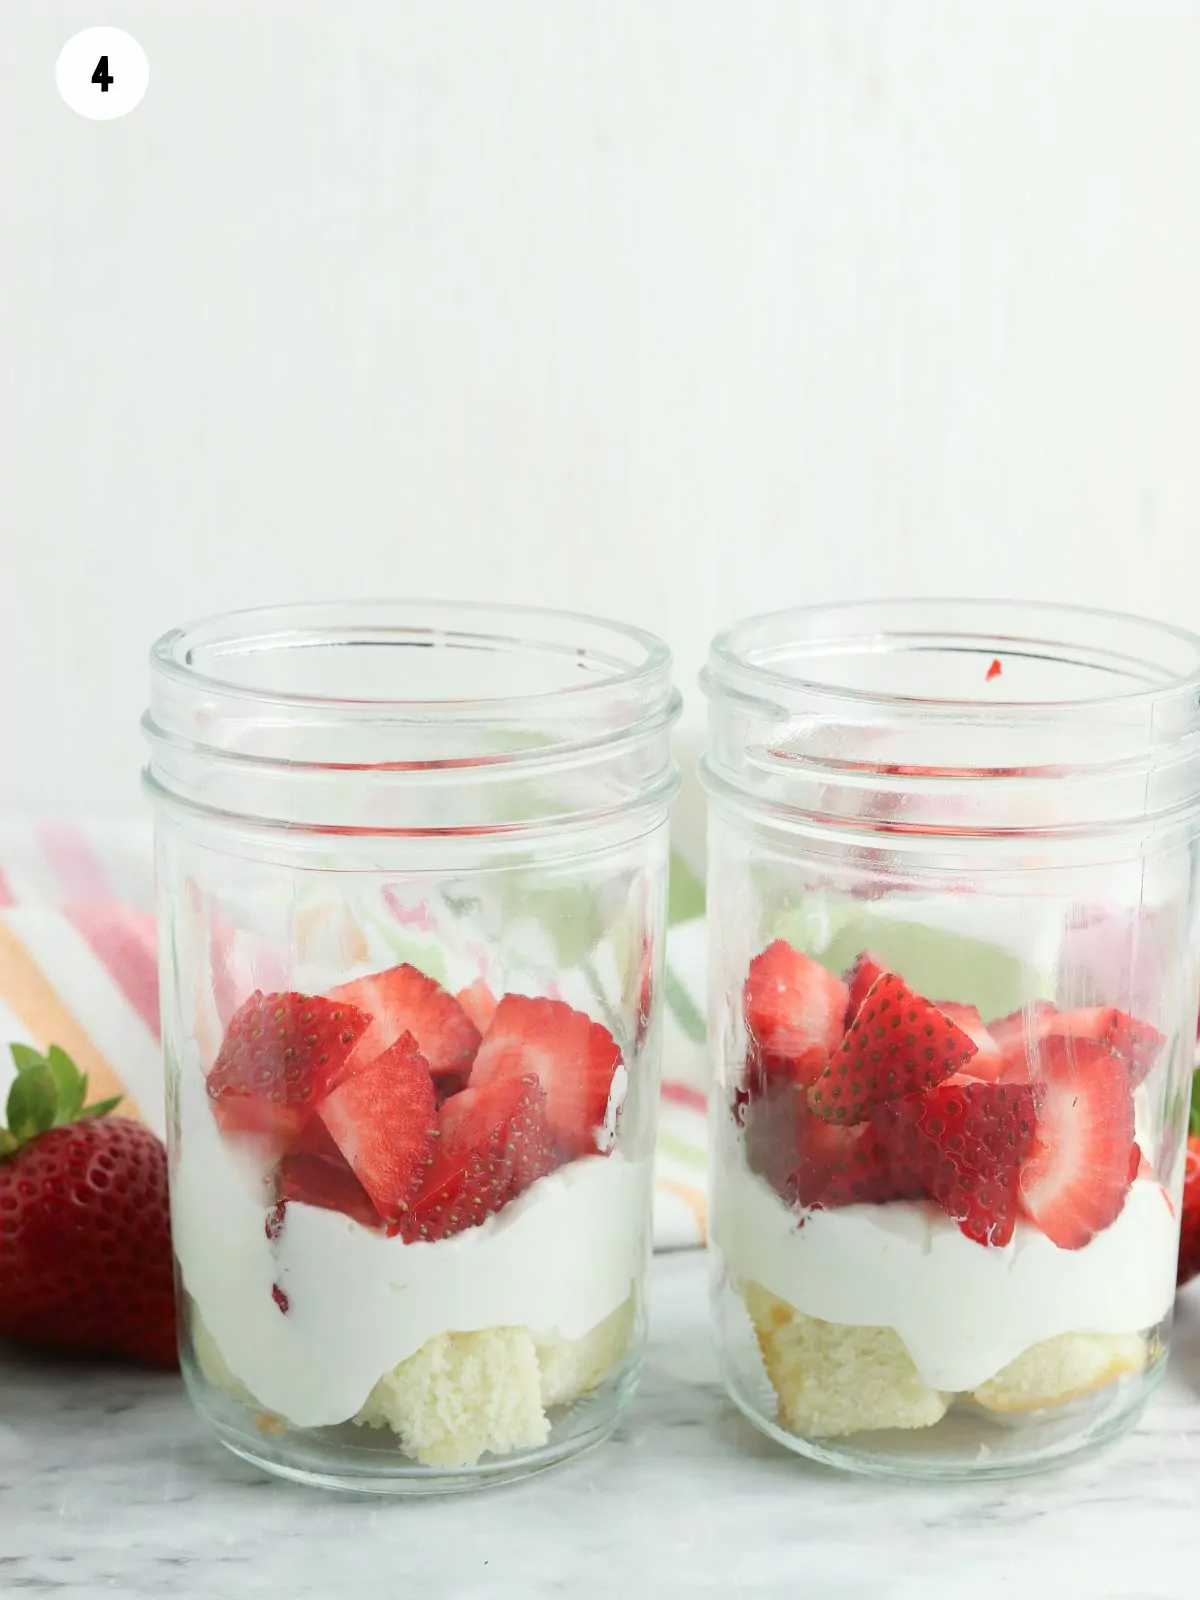 strawberry and cake in glass jars.